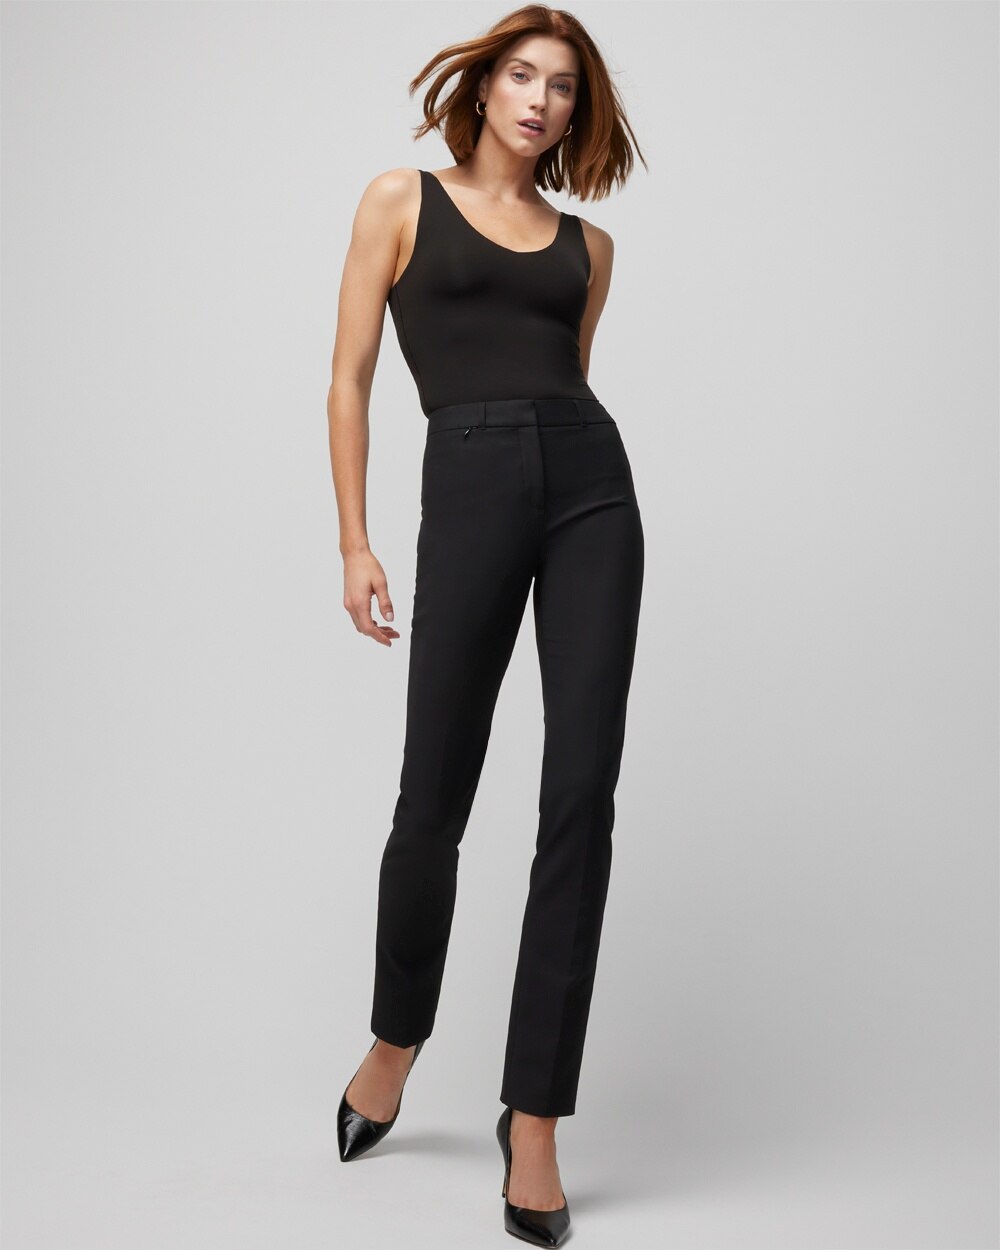 WHBM\u00AE Elle Slim Trouser Comfort Stretch Pant video preview image, click to start video